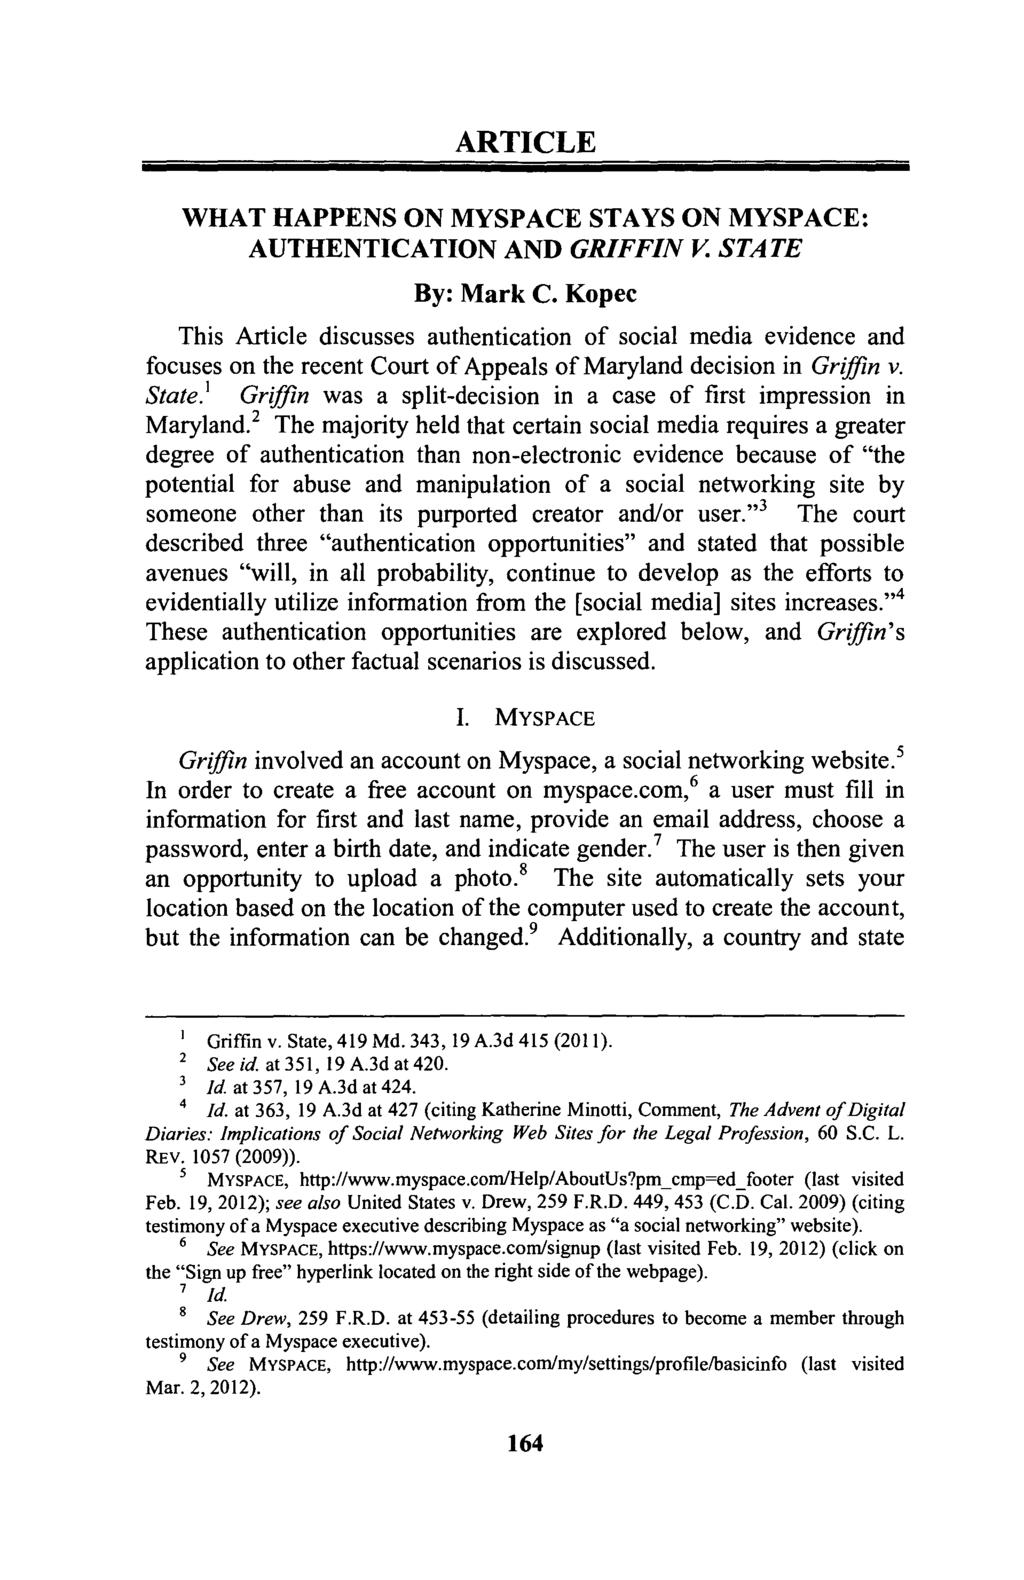 ARTICLE WHAT HAPPENS ON MYSPACE STAYS ON MYSPACE: AUTHENTICATION AND GRIFFIN V. STATE By: Mark C.